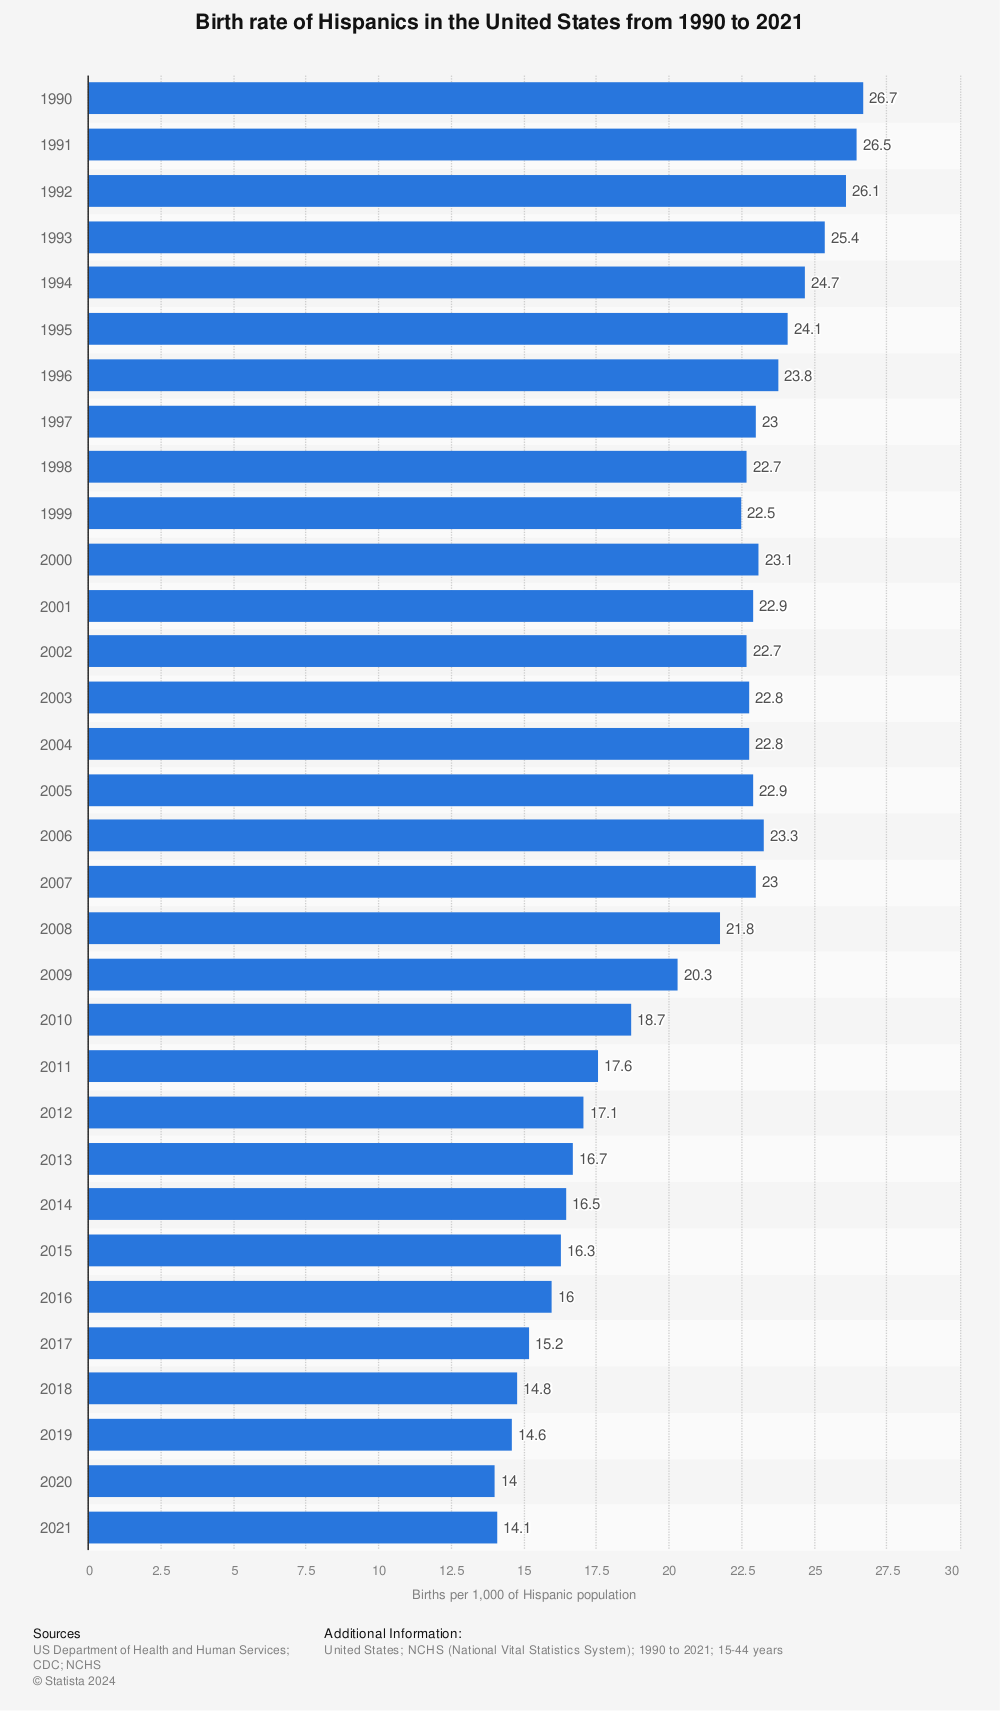 Statistic: Birth rate of Hispanics in the United States from 1990 to 2019 | Statista